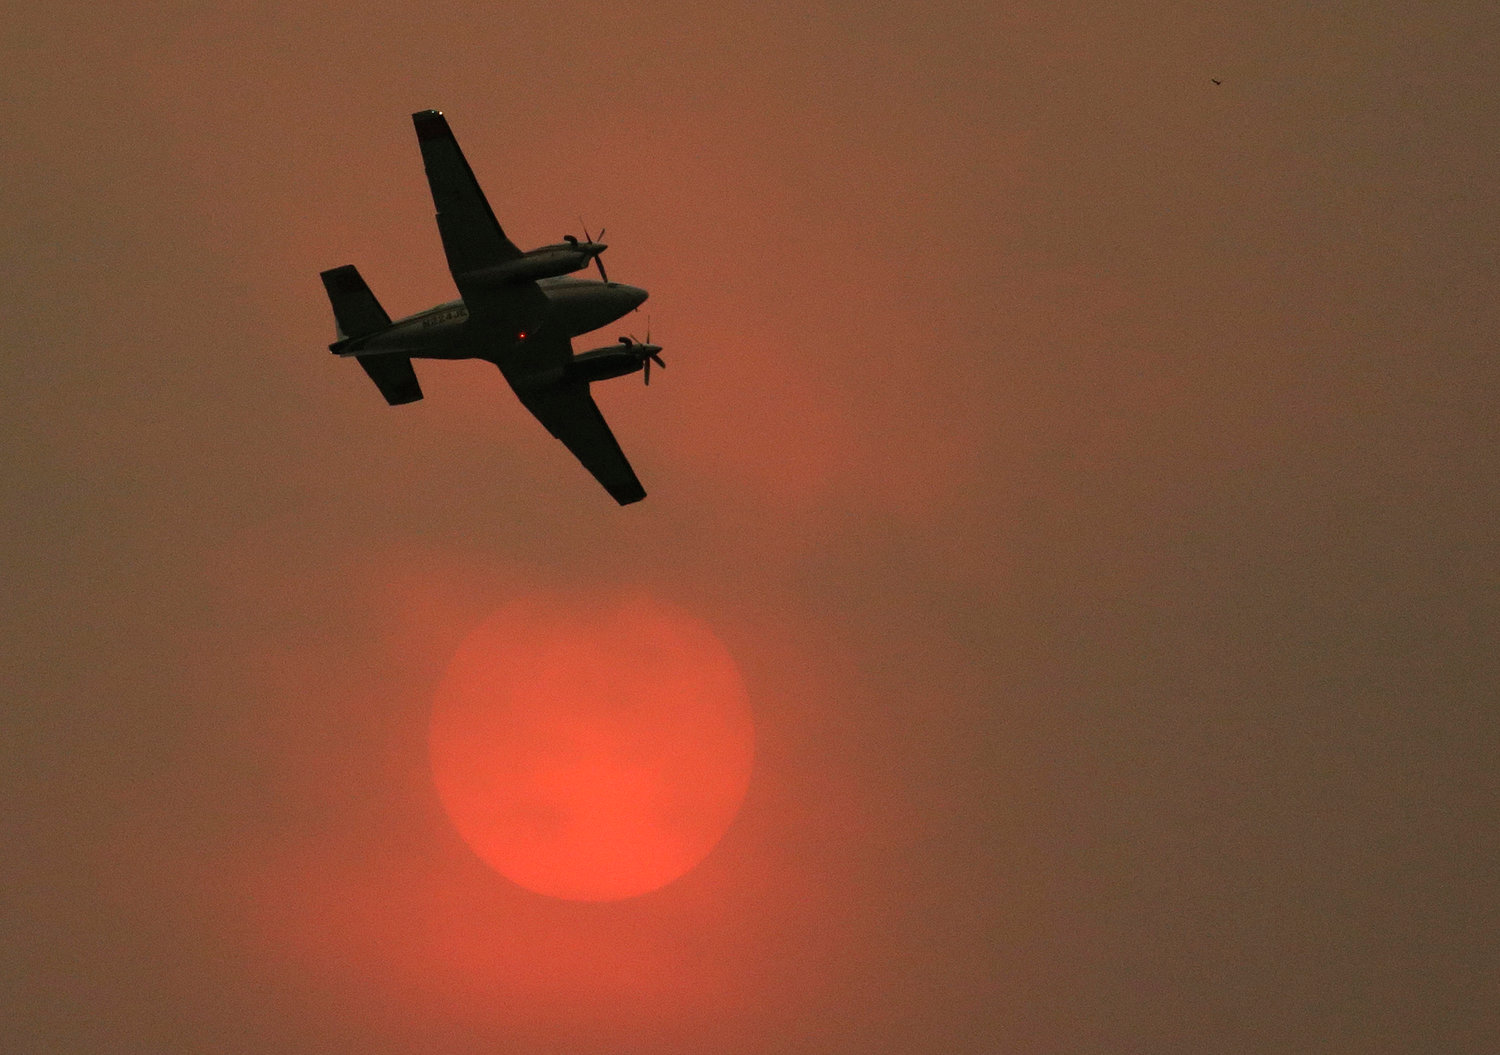 An airplane used to fight wildfires flies past the sun, which appears orange due to heavy smoke in the air while battling a blaze that flared up in the late afternoon near Omak, Wash., Thursday, Aug. 27, 2015.